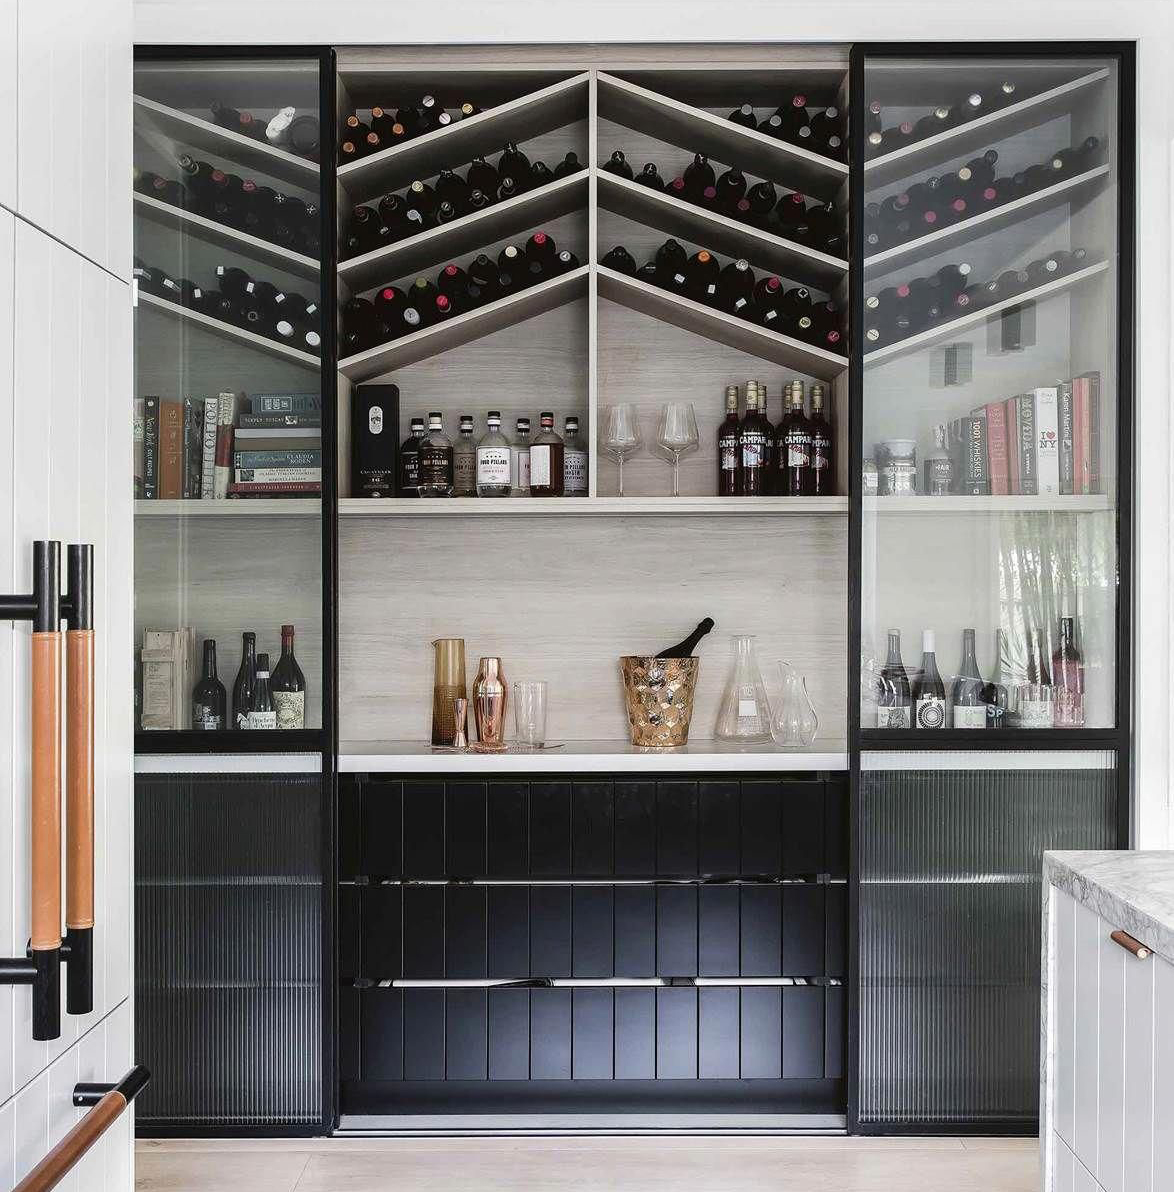 9 Of The Coolest Built In Wine Racks Home Bar Designs Built In Wine Rack Bars For Home